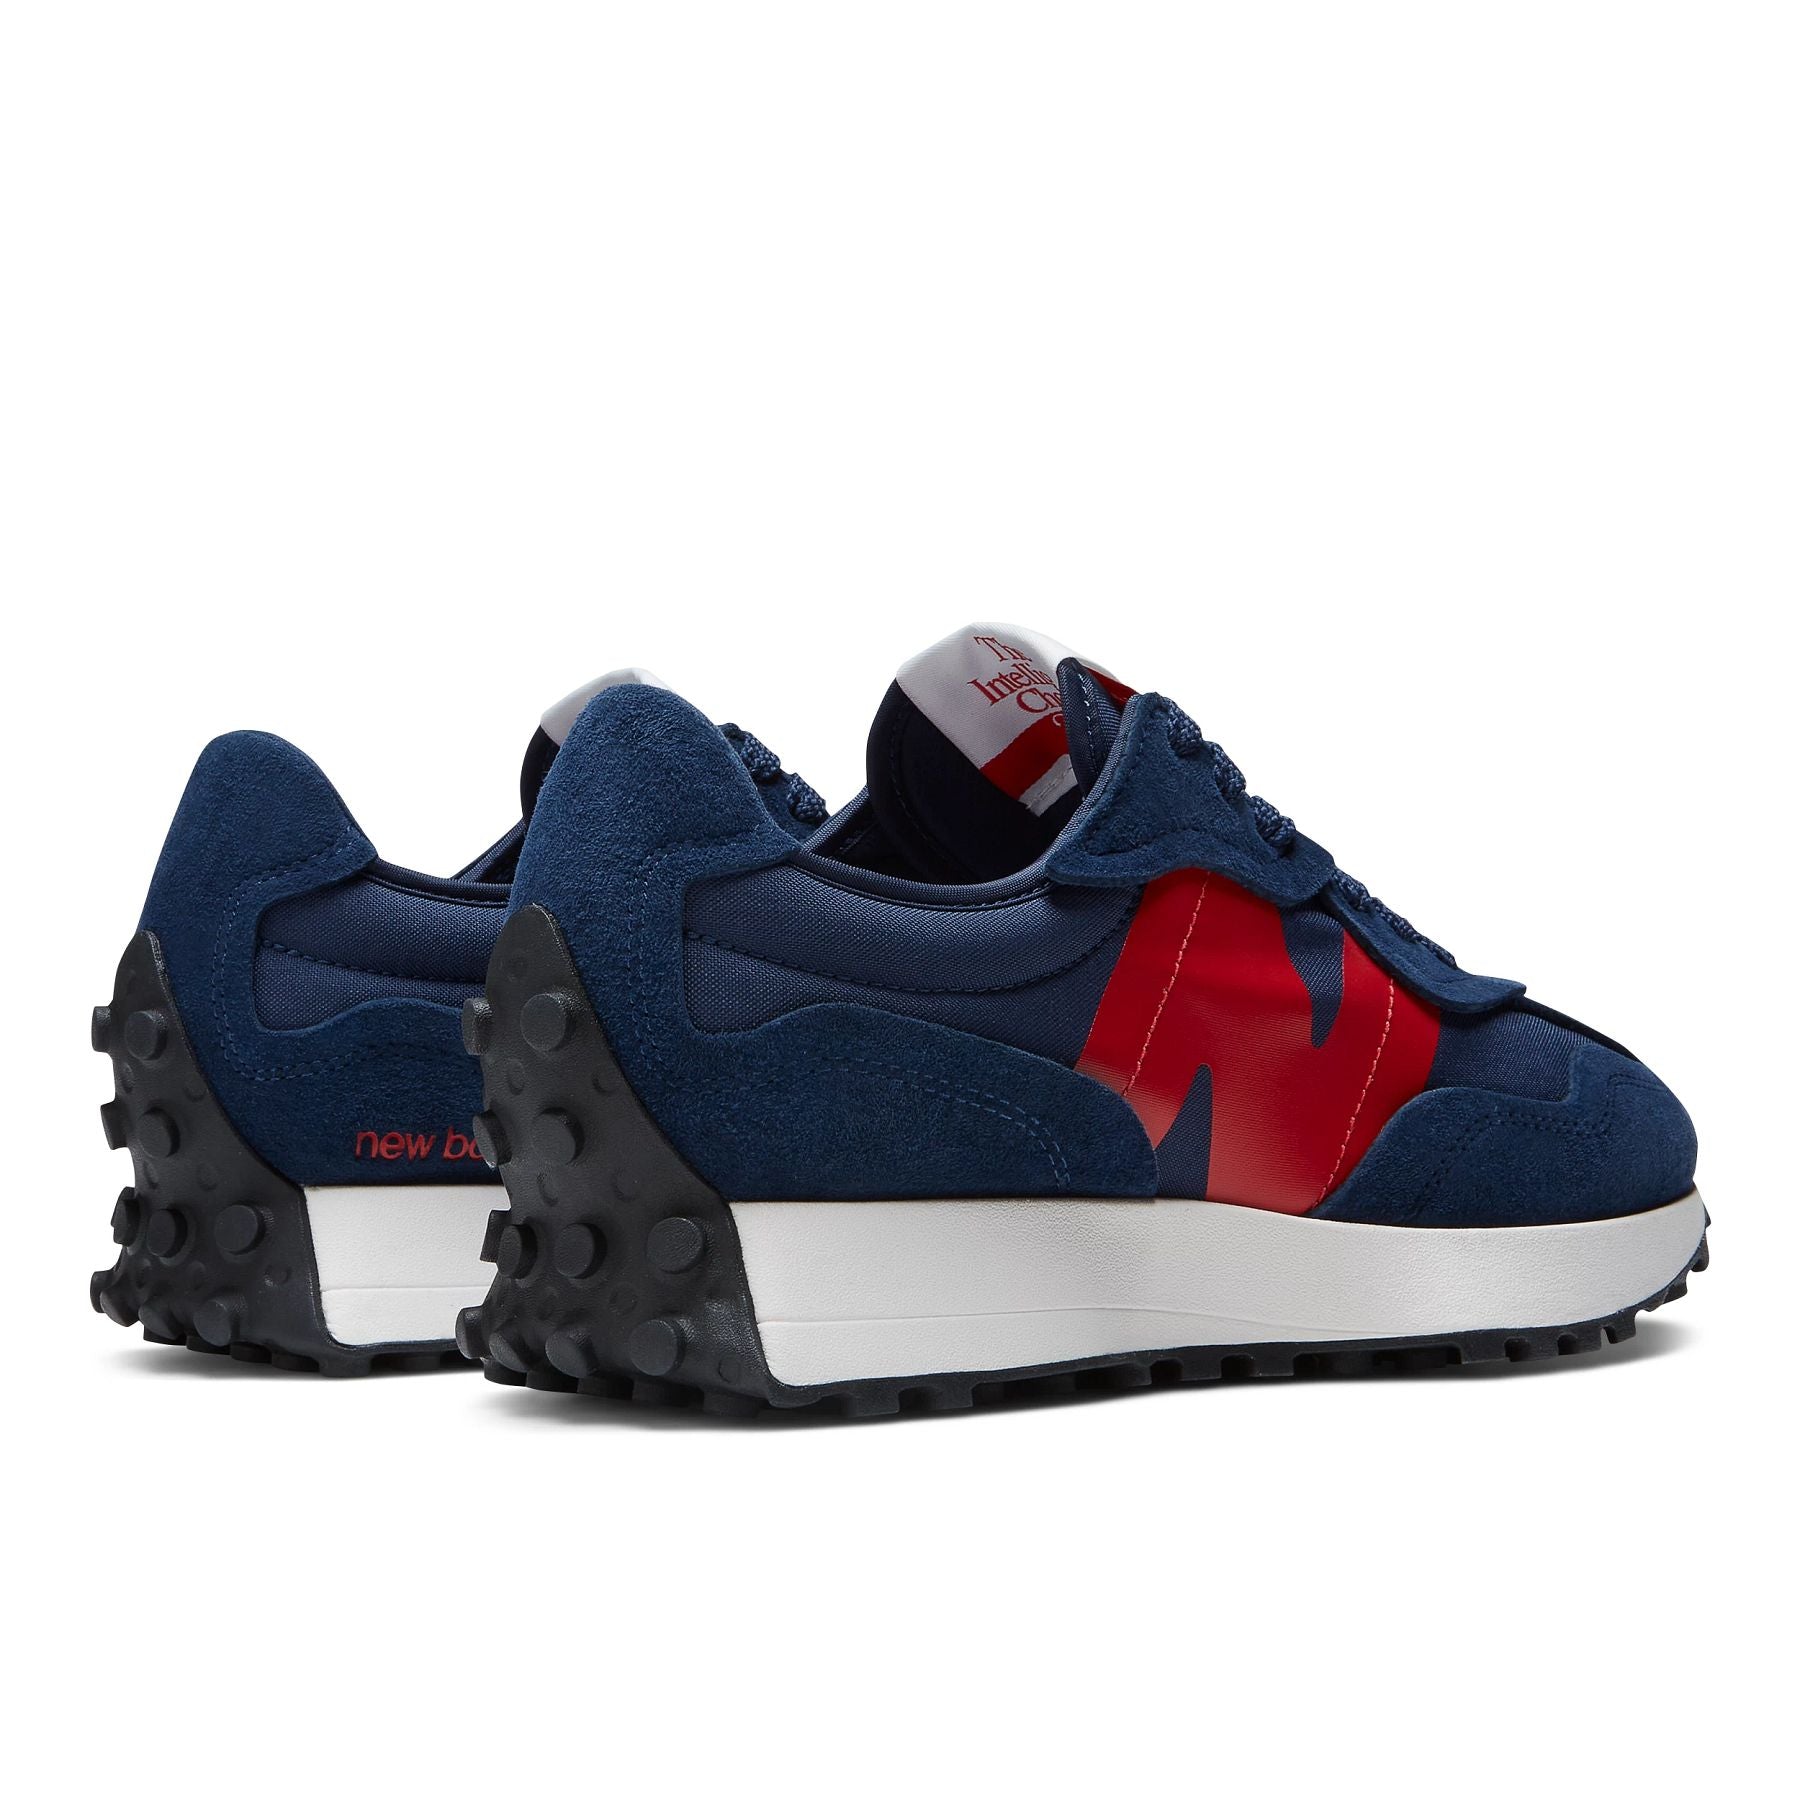 Back angle view of the Men's New Balance lifestyle 327 shoe in the color NB Navy